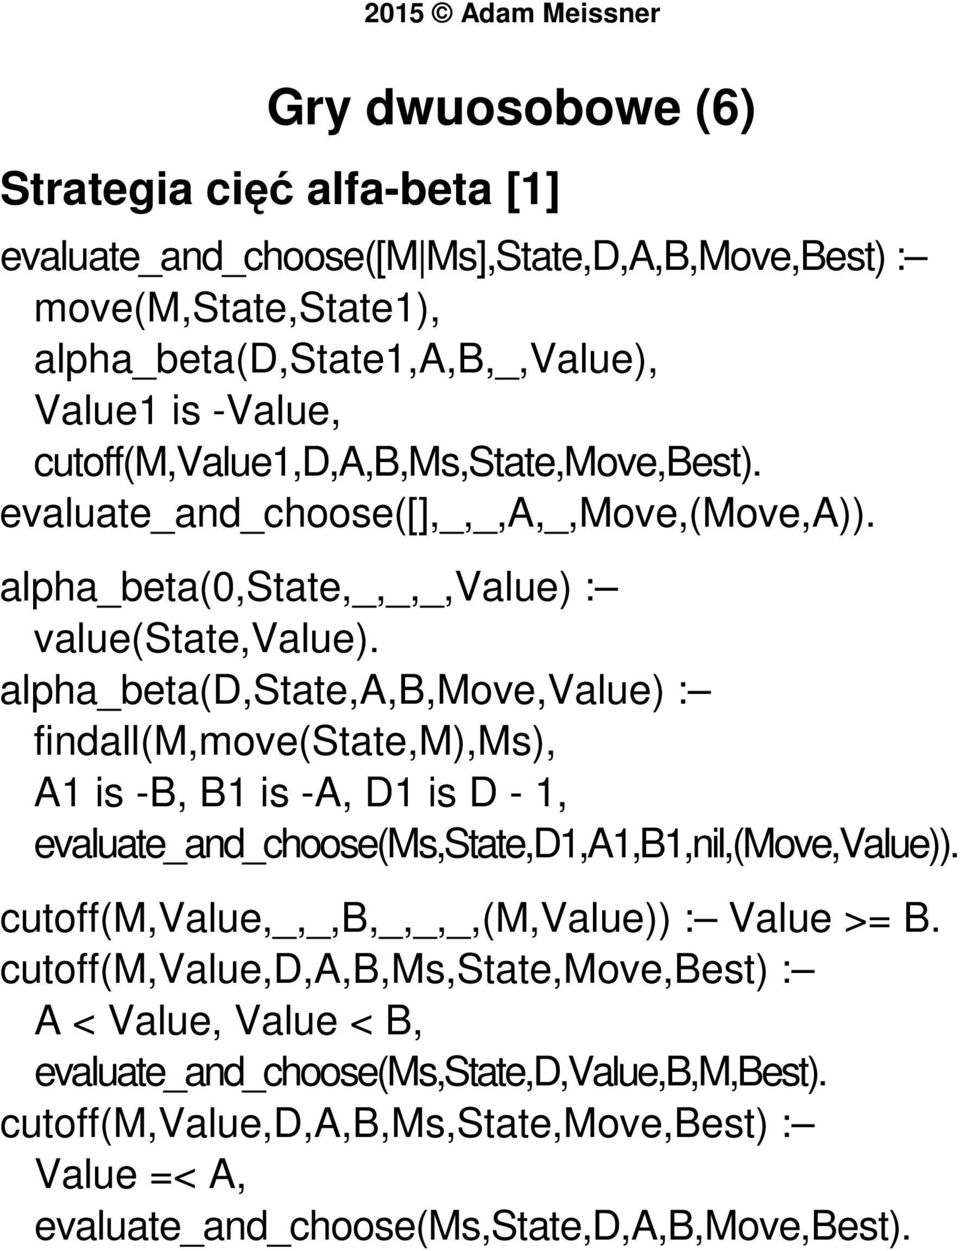 alpha_beta(d,state,a,b,move,value) : findall(m,move(state,m),ms), A1 is -B, B1 is -A, D1 is D - 1, evaluate_and_choose(ms,state,d1,a1,b1,nil,(move,value)).